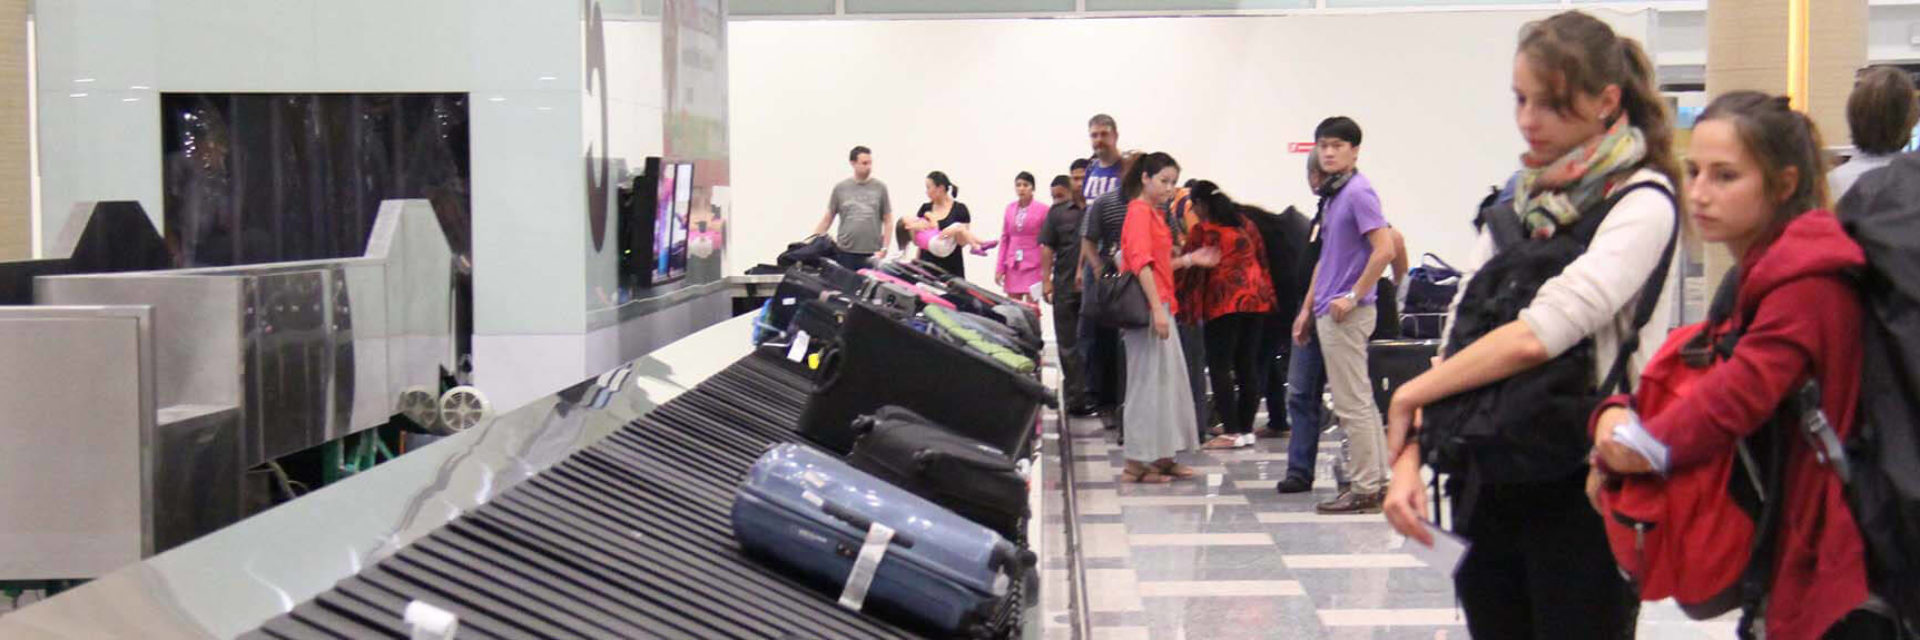 Baggage Re-Claim System